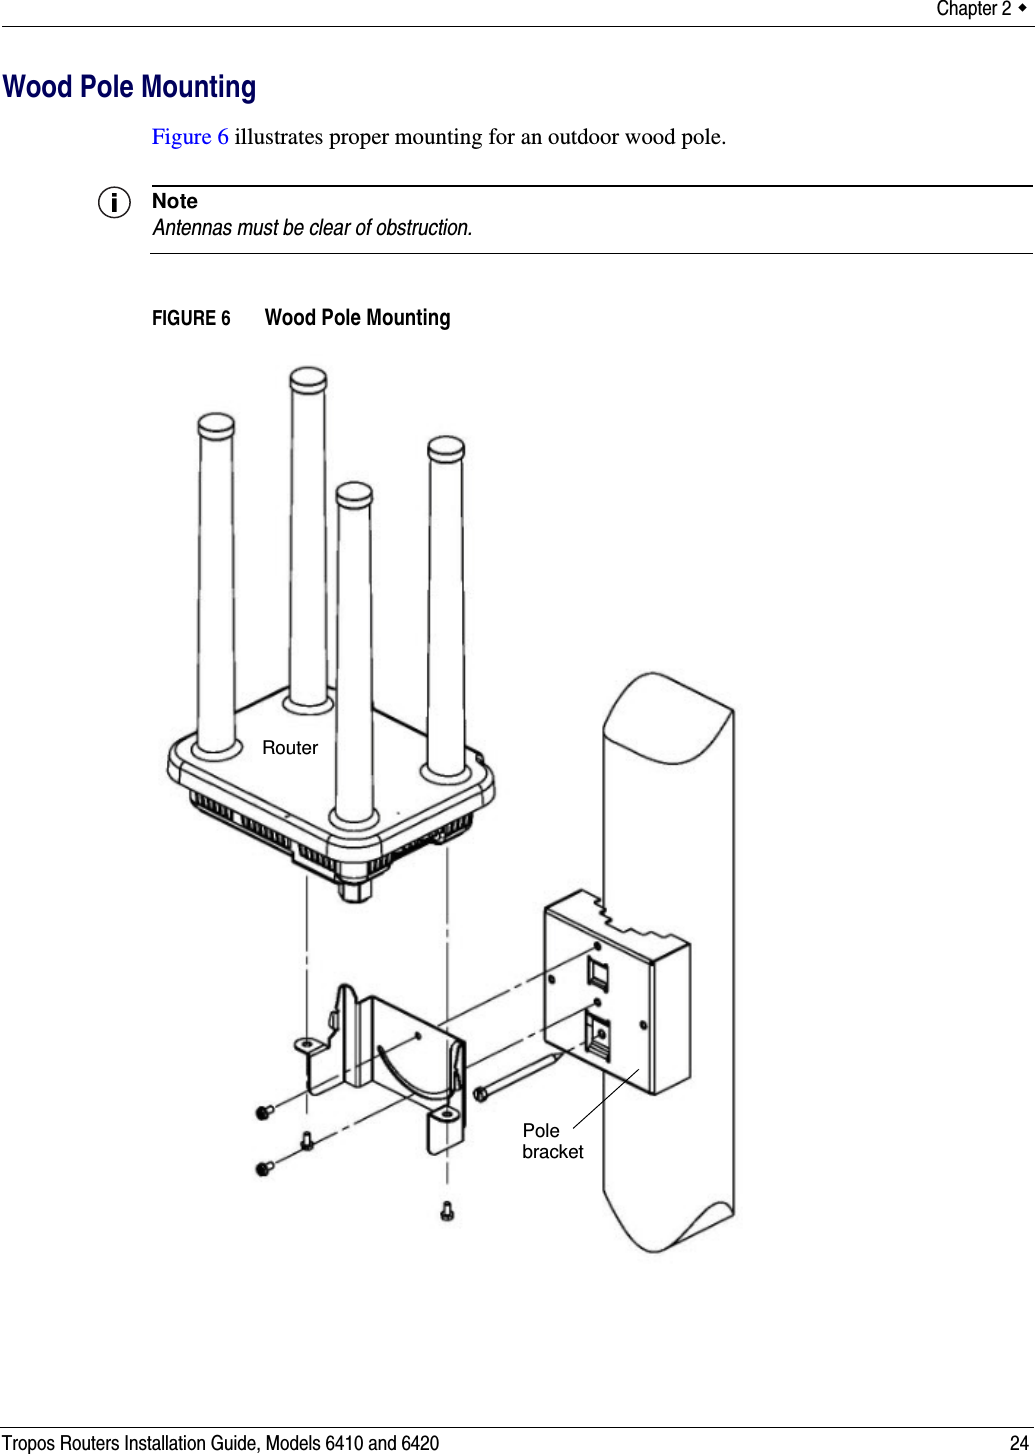 Chapter 2  Tropos Routers Installation Guide, Models 6410 and 6420 24Wood Pole MountingFigure 6 illustrates proper mounting for an outdoor wood pole.NoteAntennas must be clear of obstruction.FIGURE 6   Wood Pole MountingPole bracketRouter